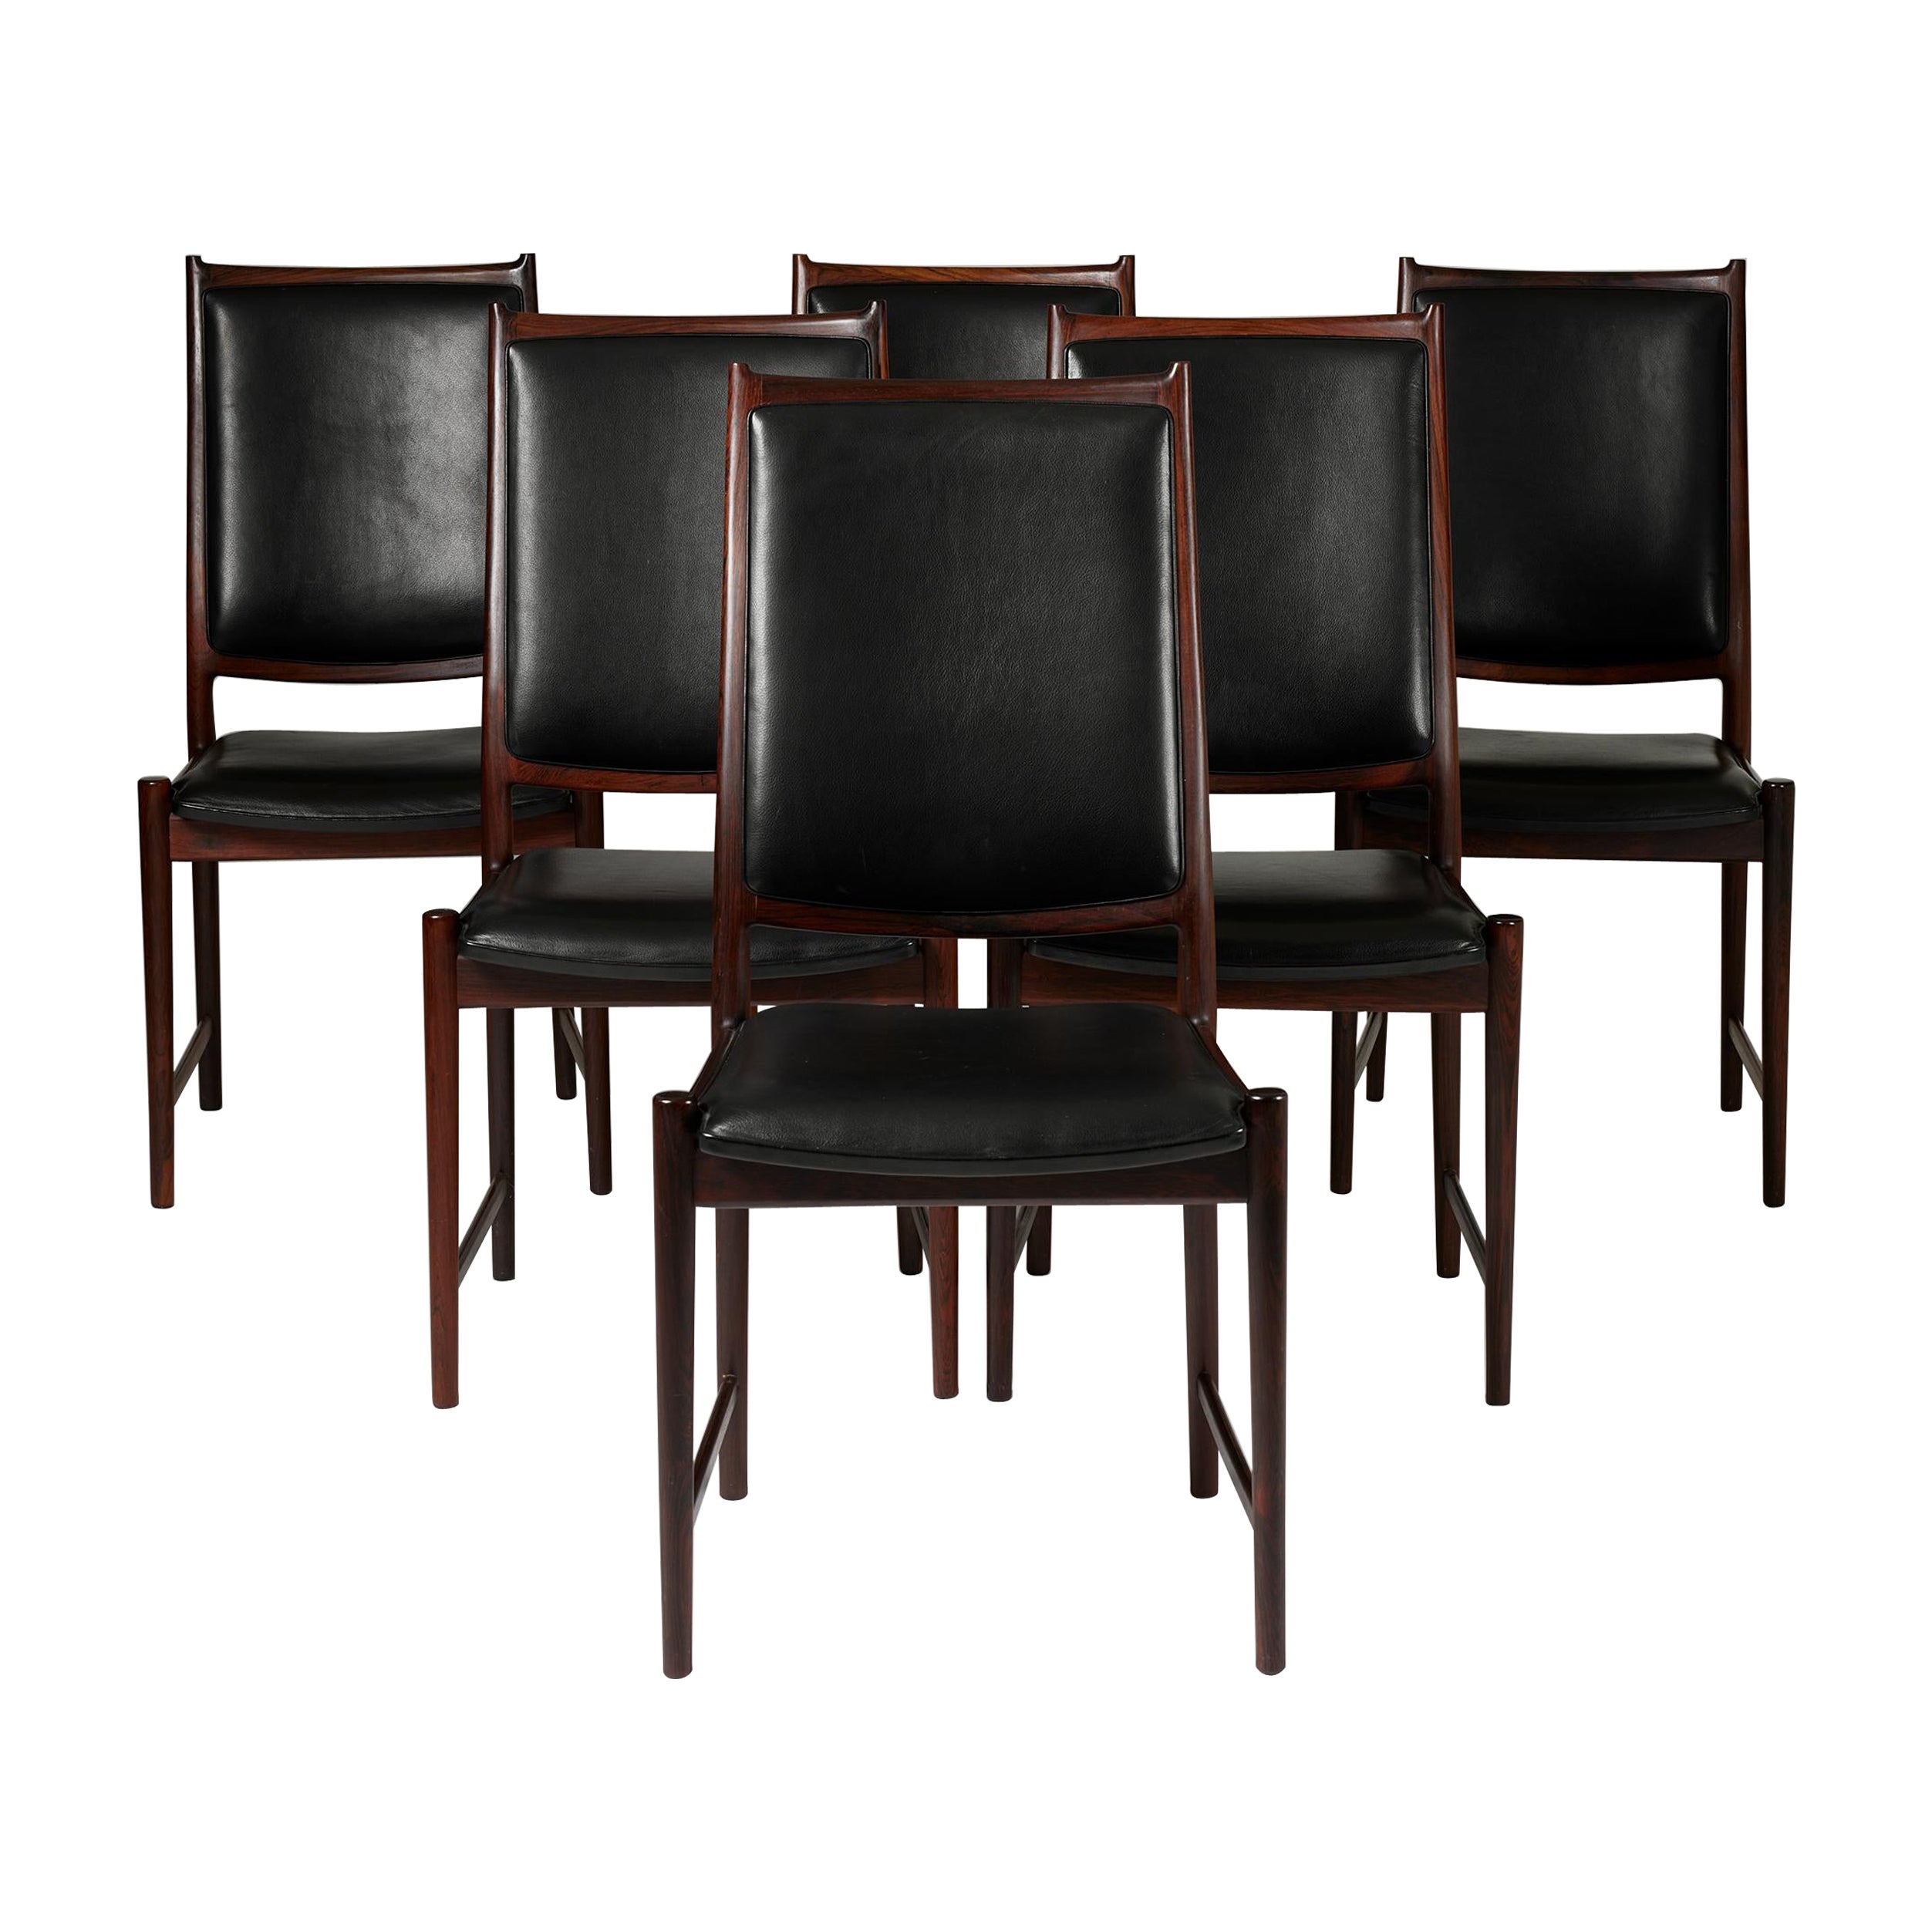 Set of six dining chairs ‘Darby’ designed by Torbjörn Afdal for Bruksbo, Norway